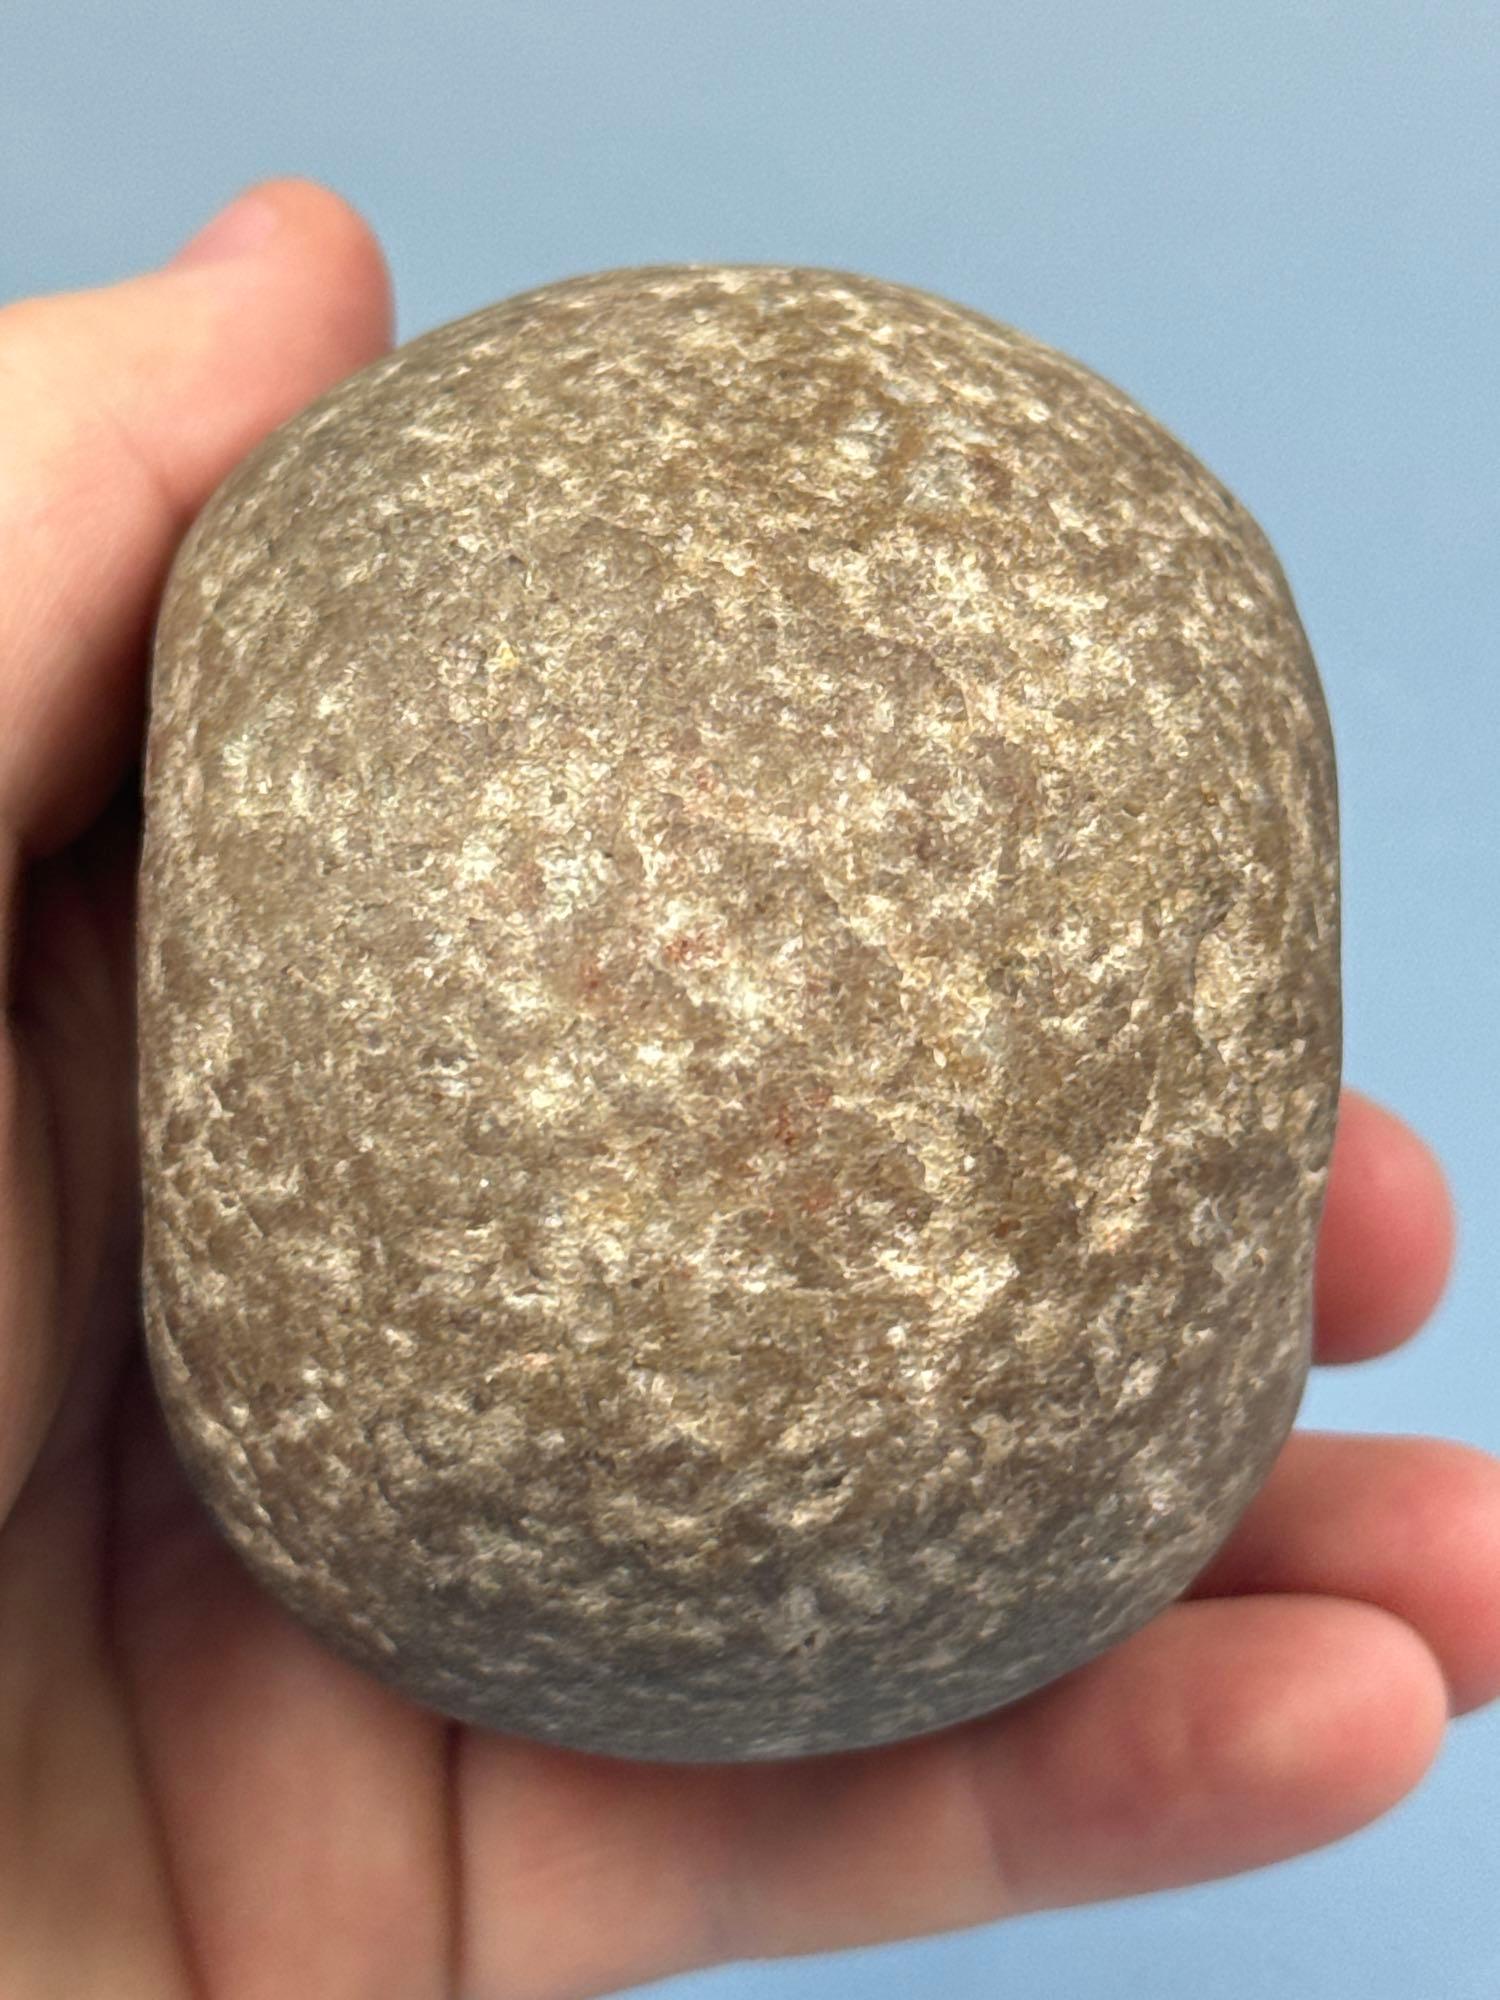 3" Wide x 2 1/2" Tall Double Cupped Discoidal, Found n Greene Co., Ohio, Ex: Bob Sharp Collection, W